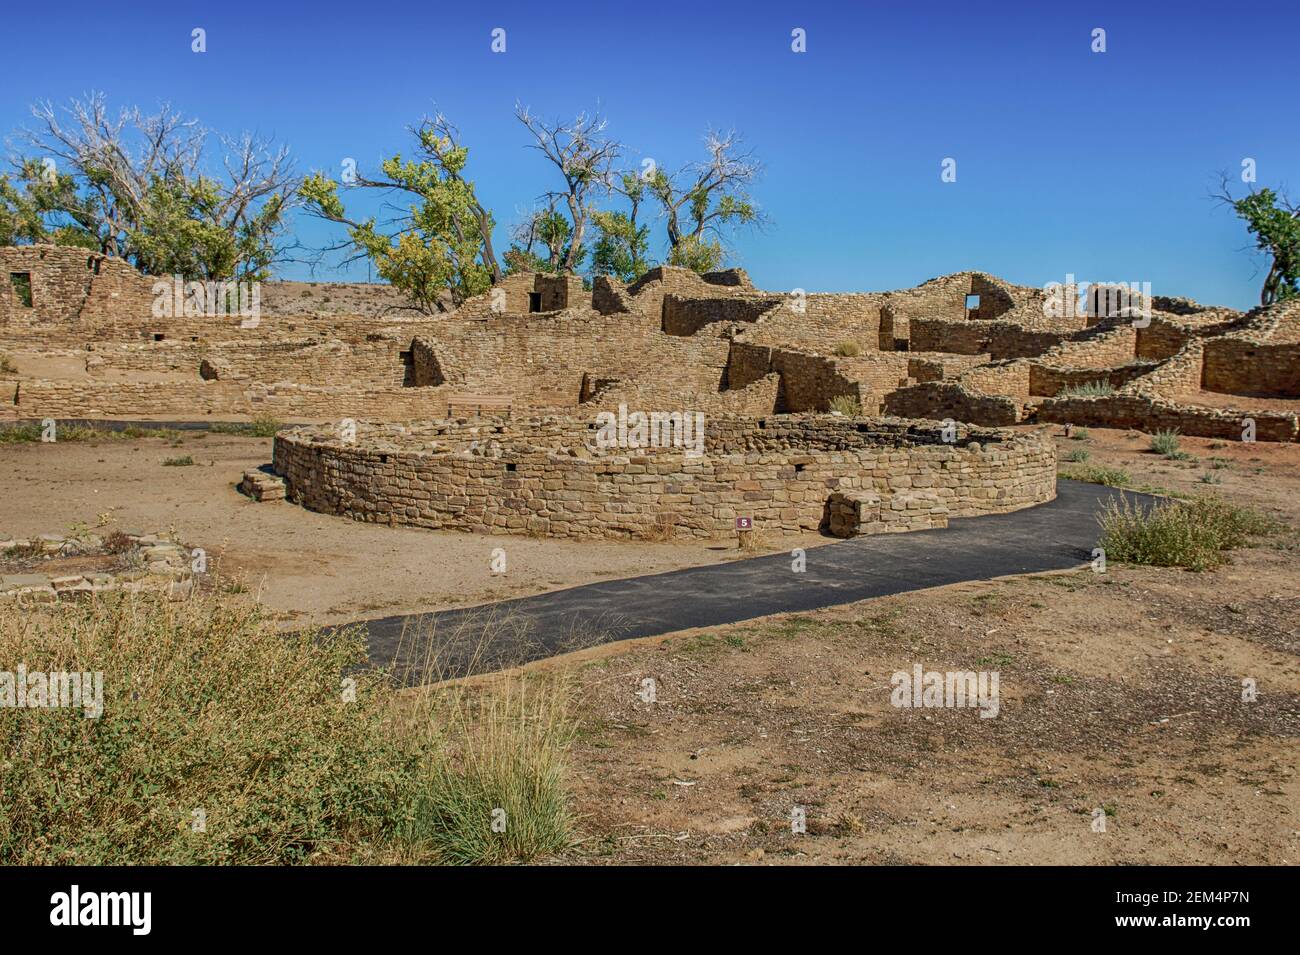 Aztec Ruins National Monument, ancestral pueblo ruins and kiva in the Four Corners region, New Mexico, USA. Stock Photo